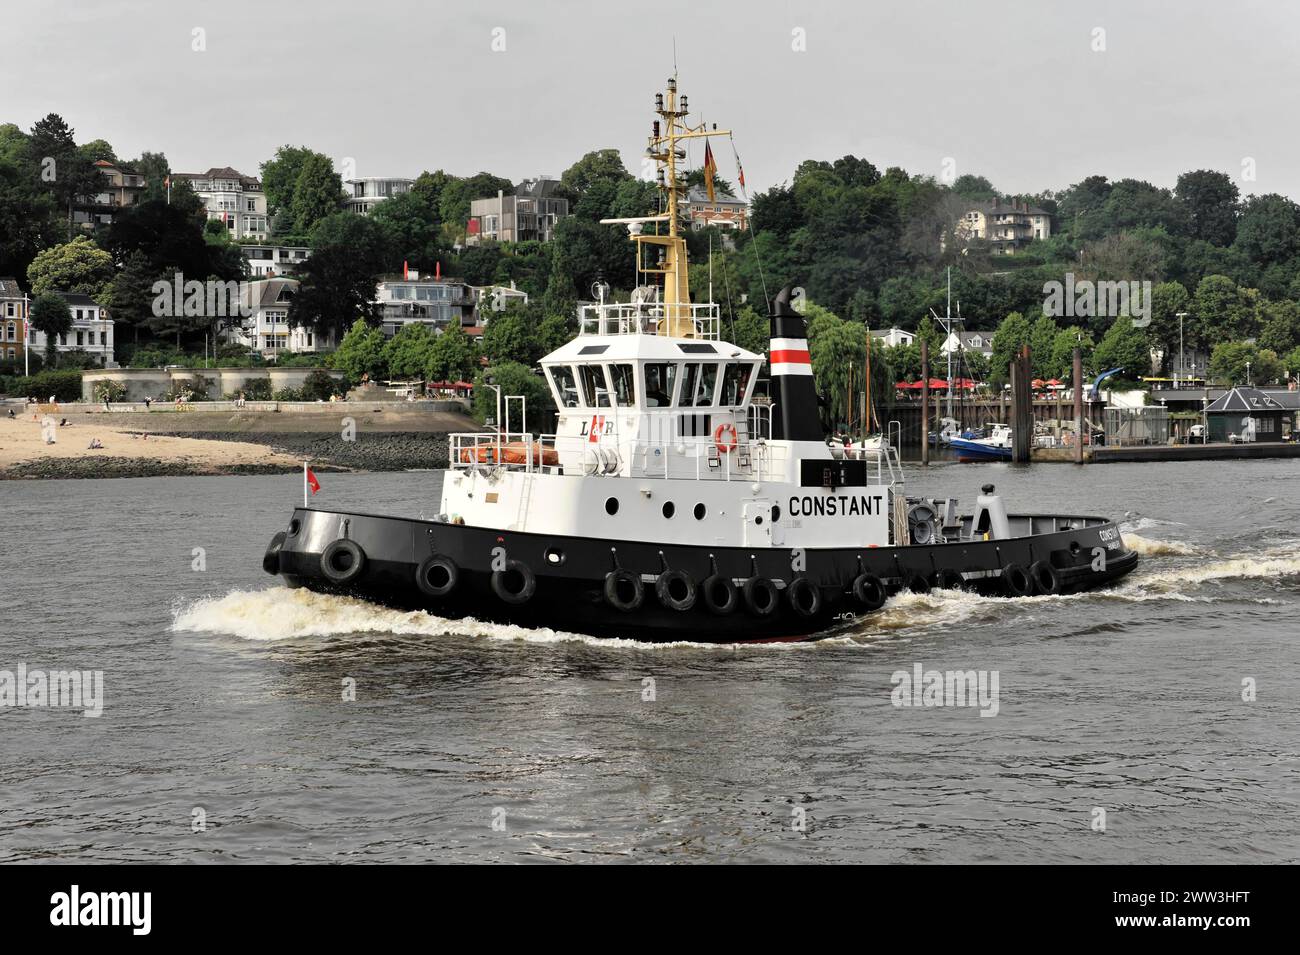 A tugboat sailing on a river (Elbe) with a city in the background, Hamburg, Hanseatic City of Hamburg, Germany Stock Photo